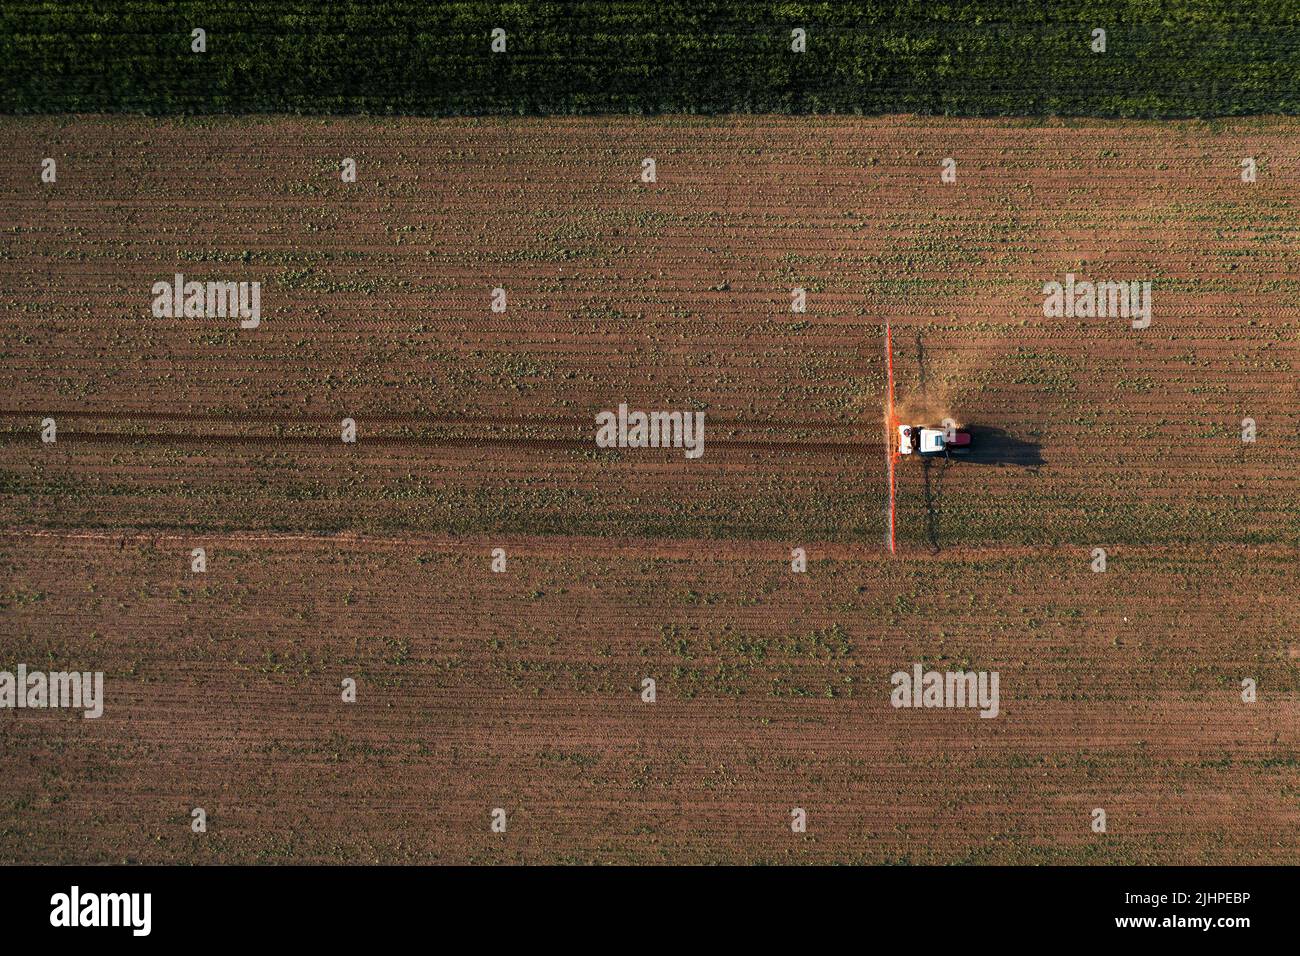 Aerial shot of agricultural tractor with crop sprayer attached spraying herbicide chemical over corn plantation, drone pov directly above Stock Photo